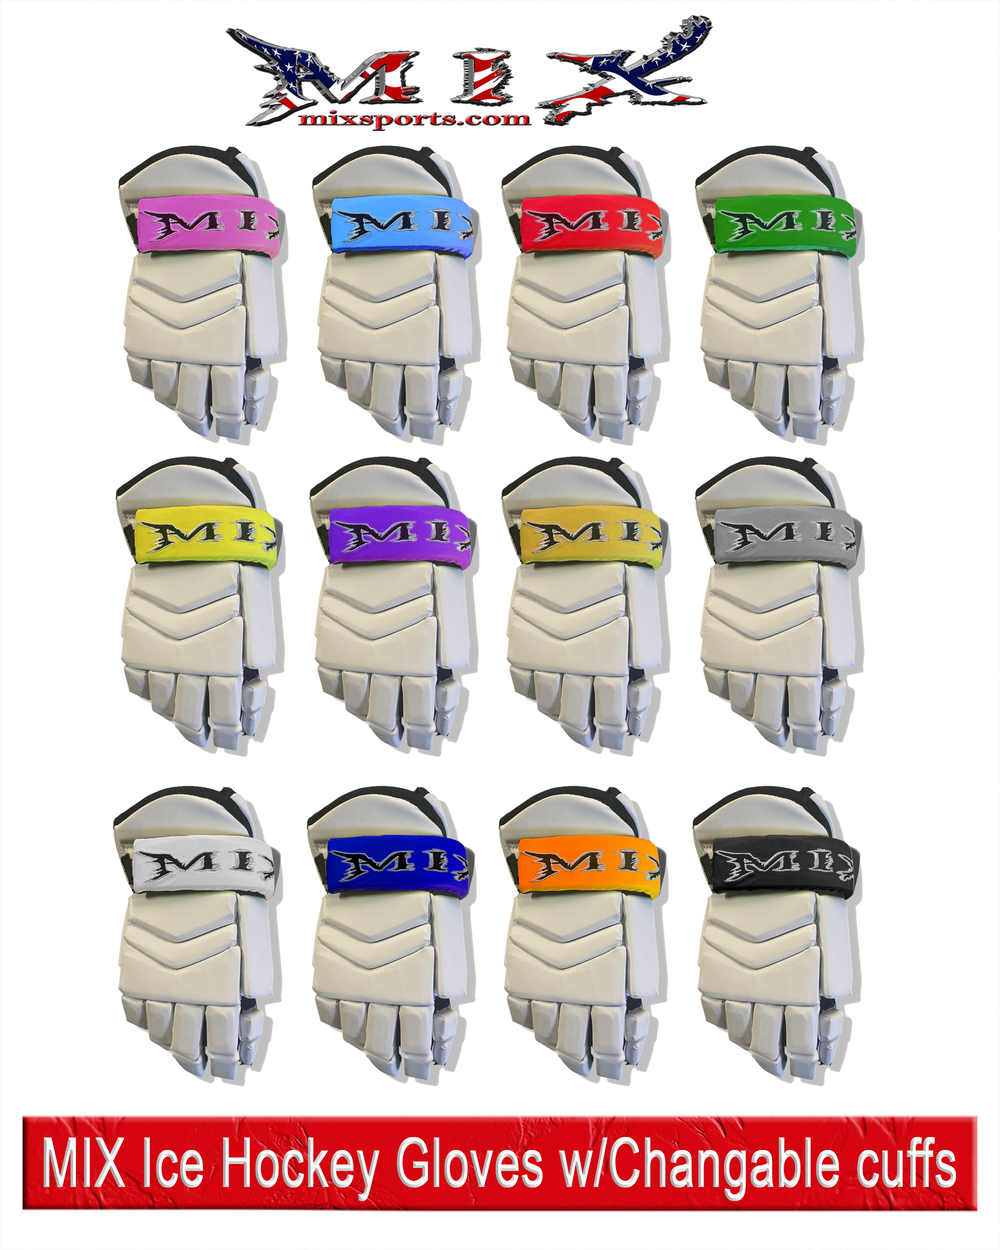 15" MIX Ice Hockey MX5 Gloves - White Out ((Free Color Cuffs)) **White cuffs included.